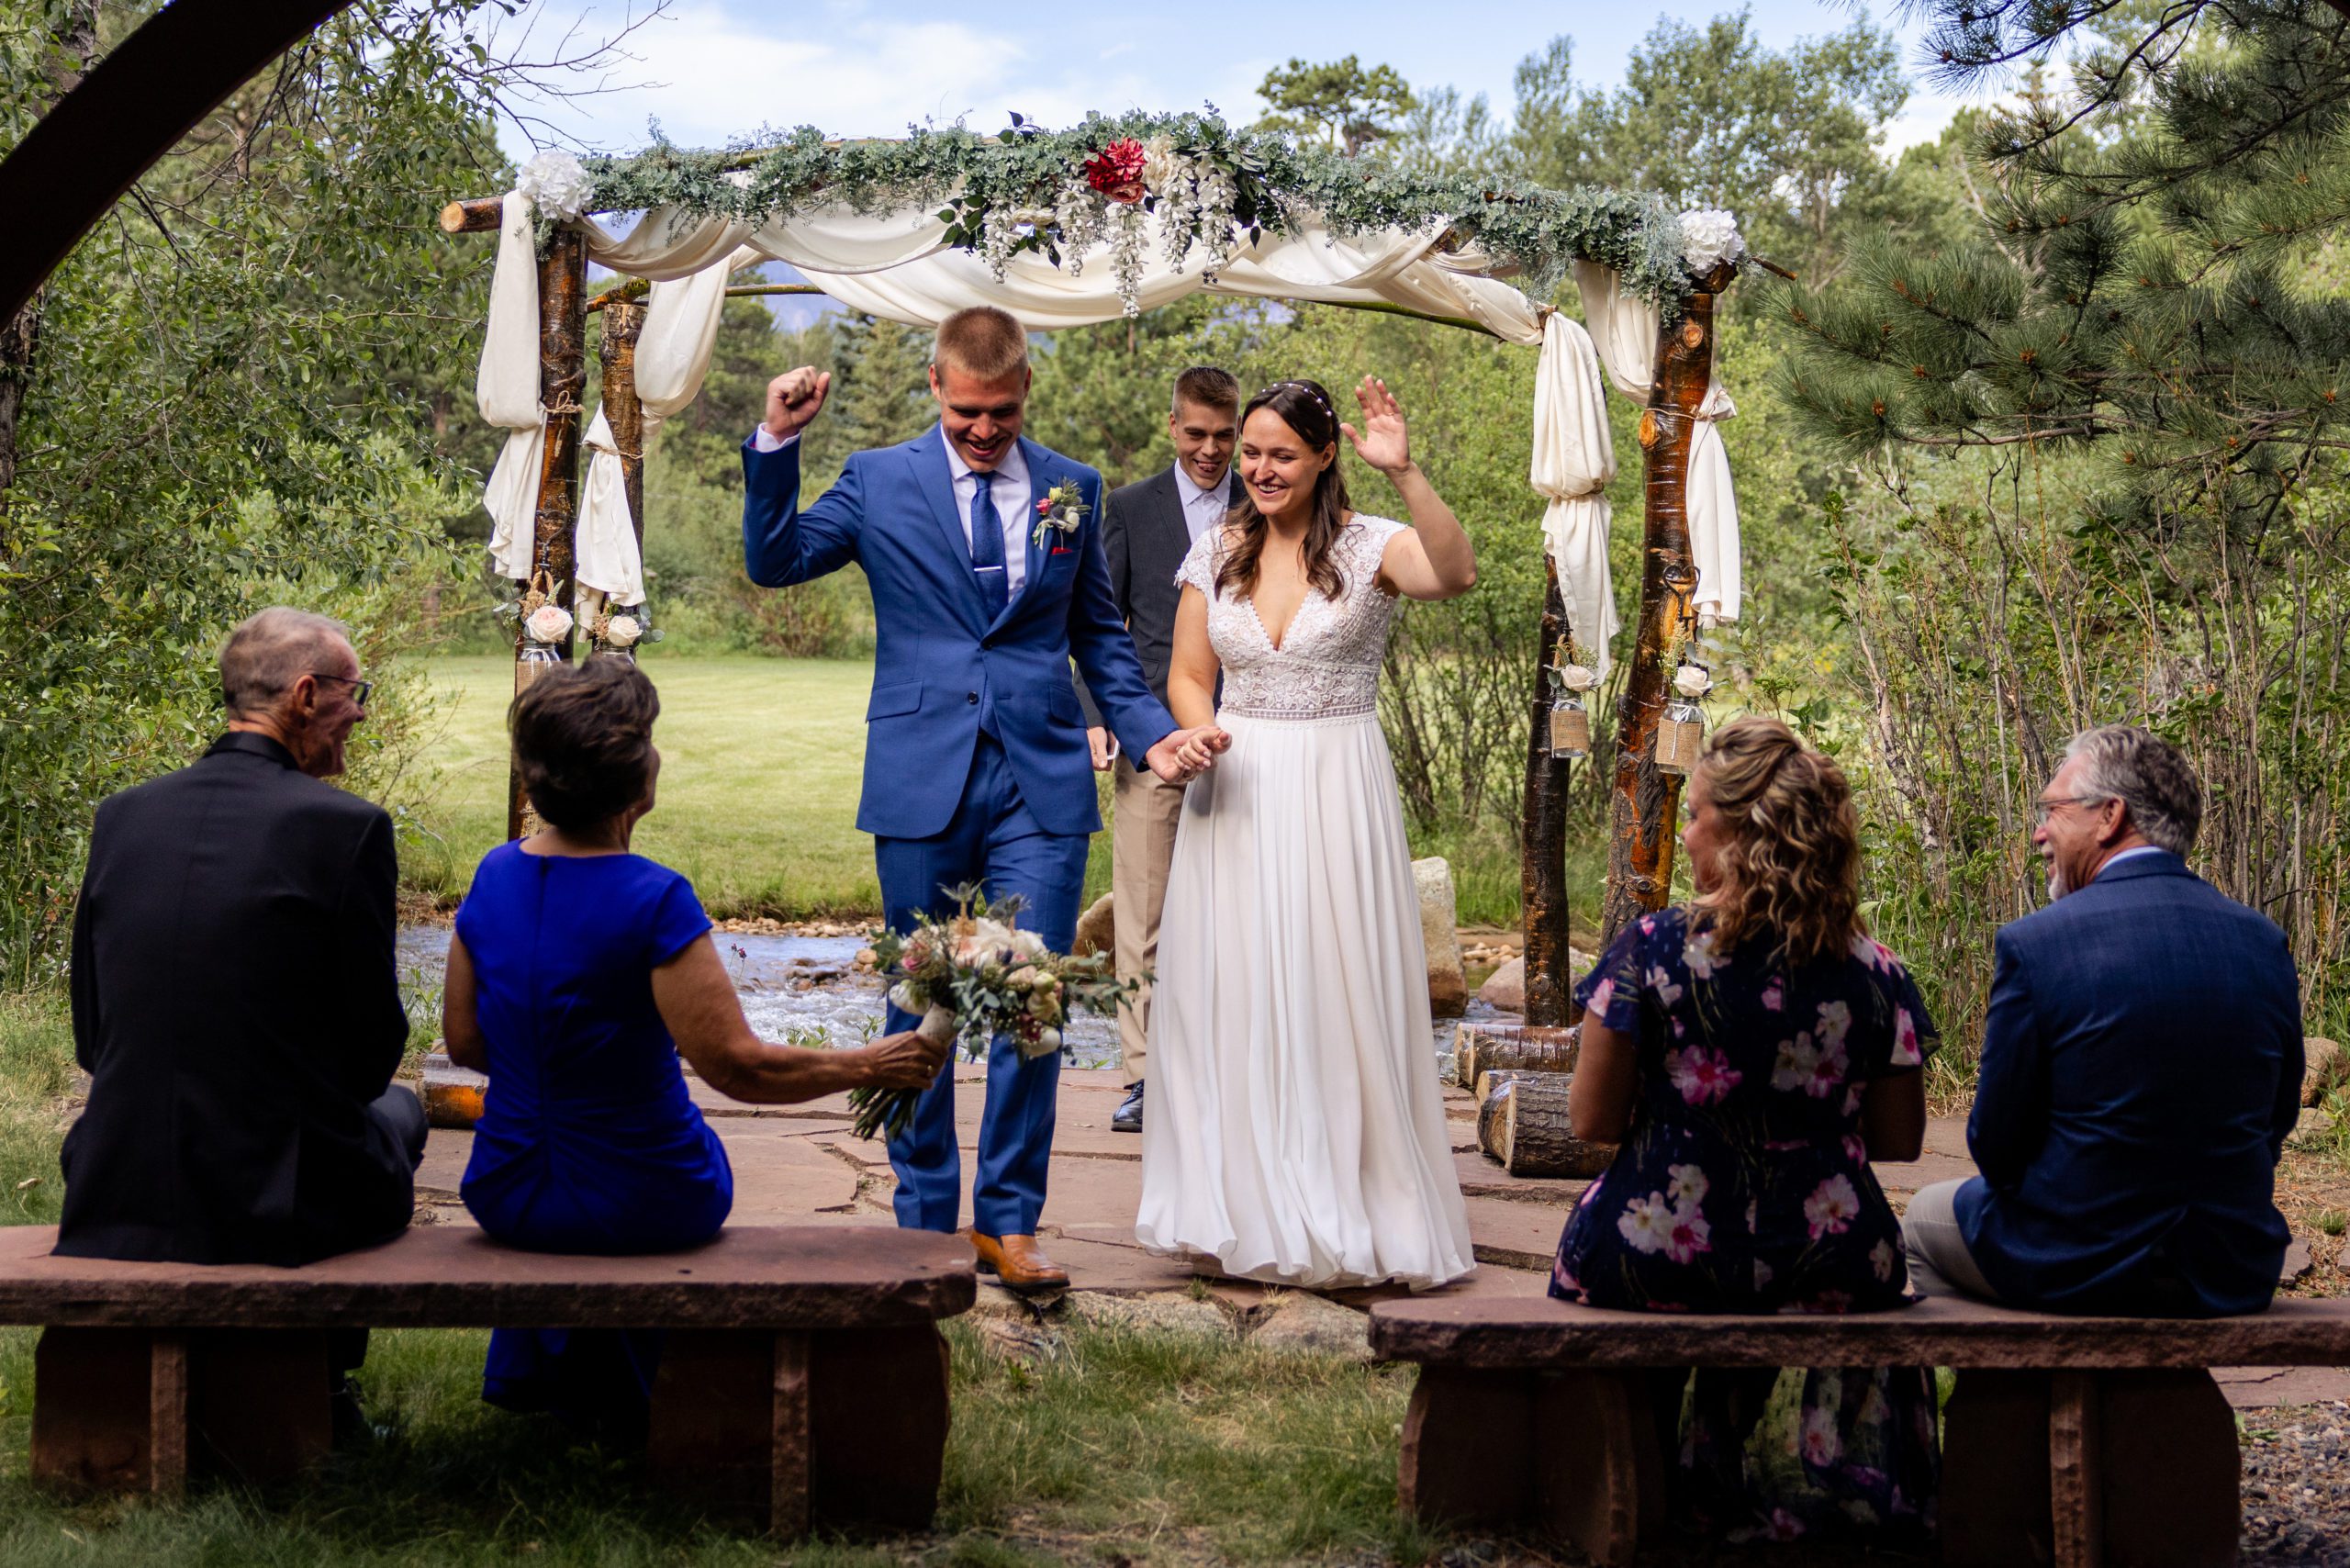 The bride and groom raise their hands in celebration of becoming husband and wife after their ceremony at Romantic RiverSong Inn in Estes Park.